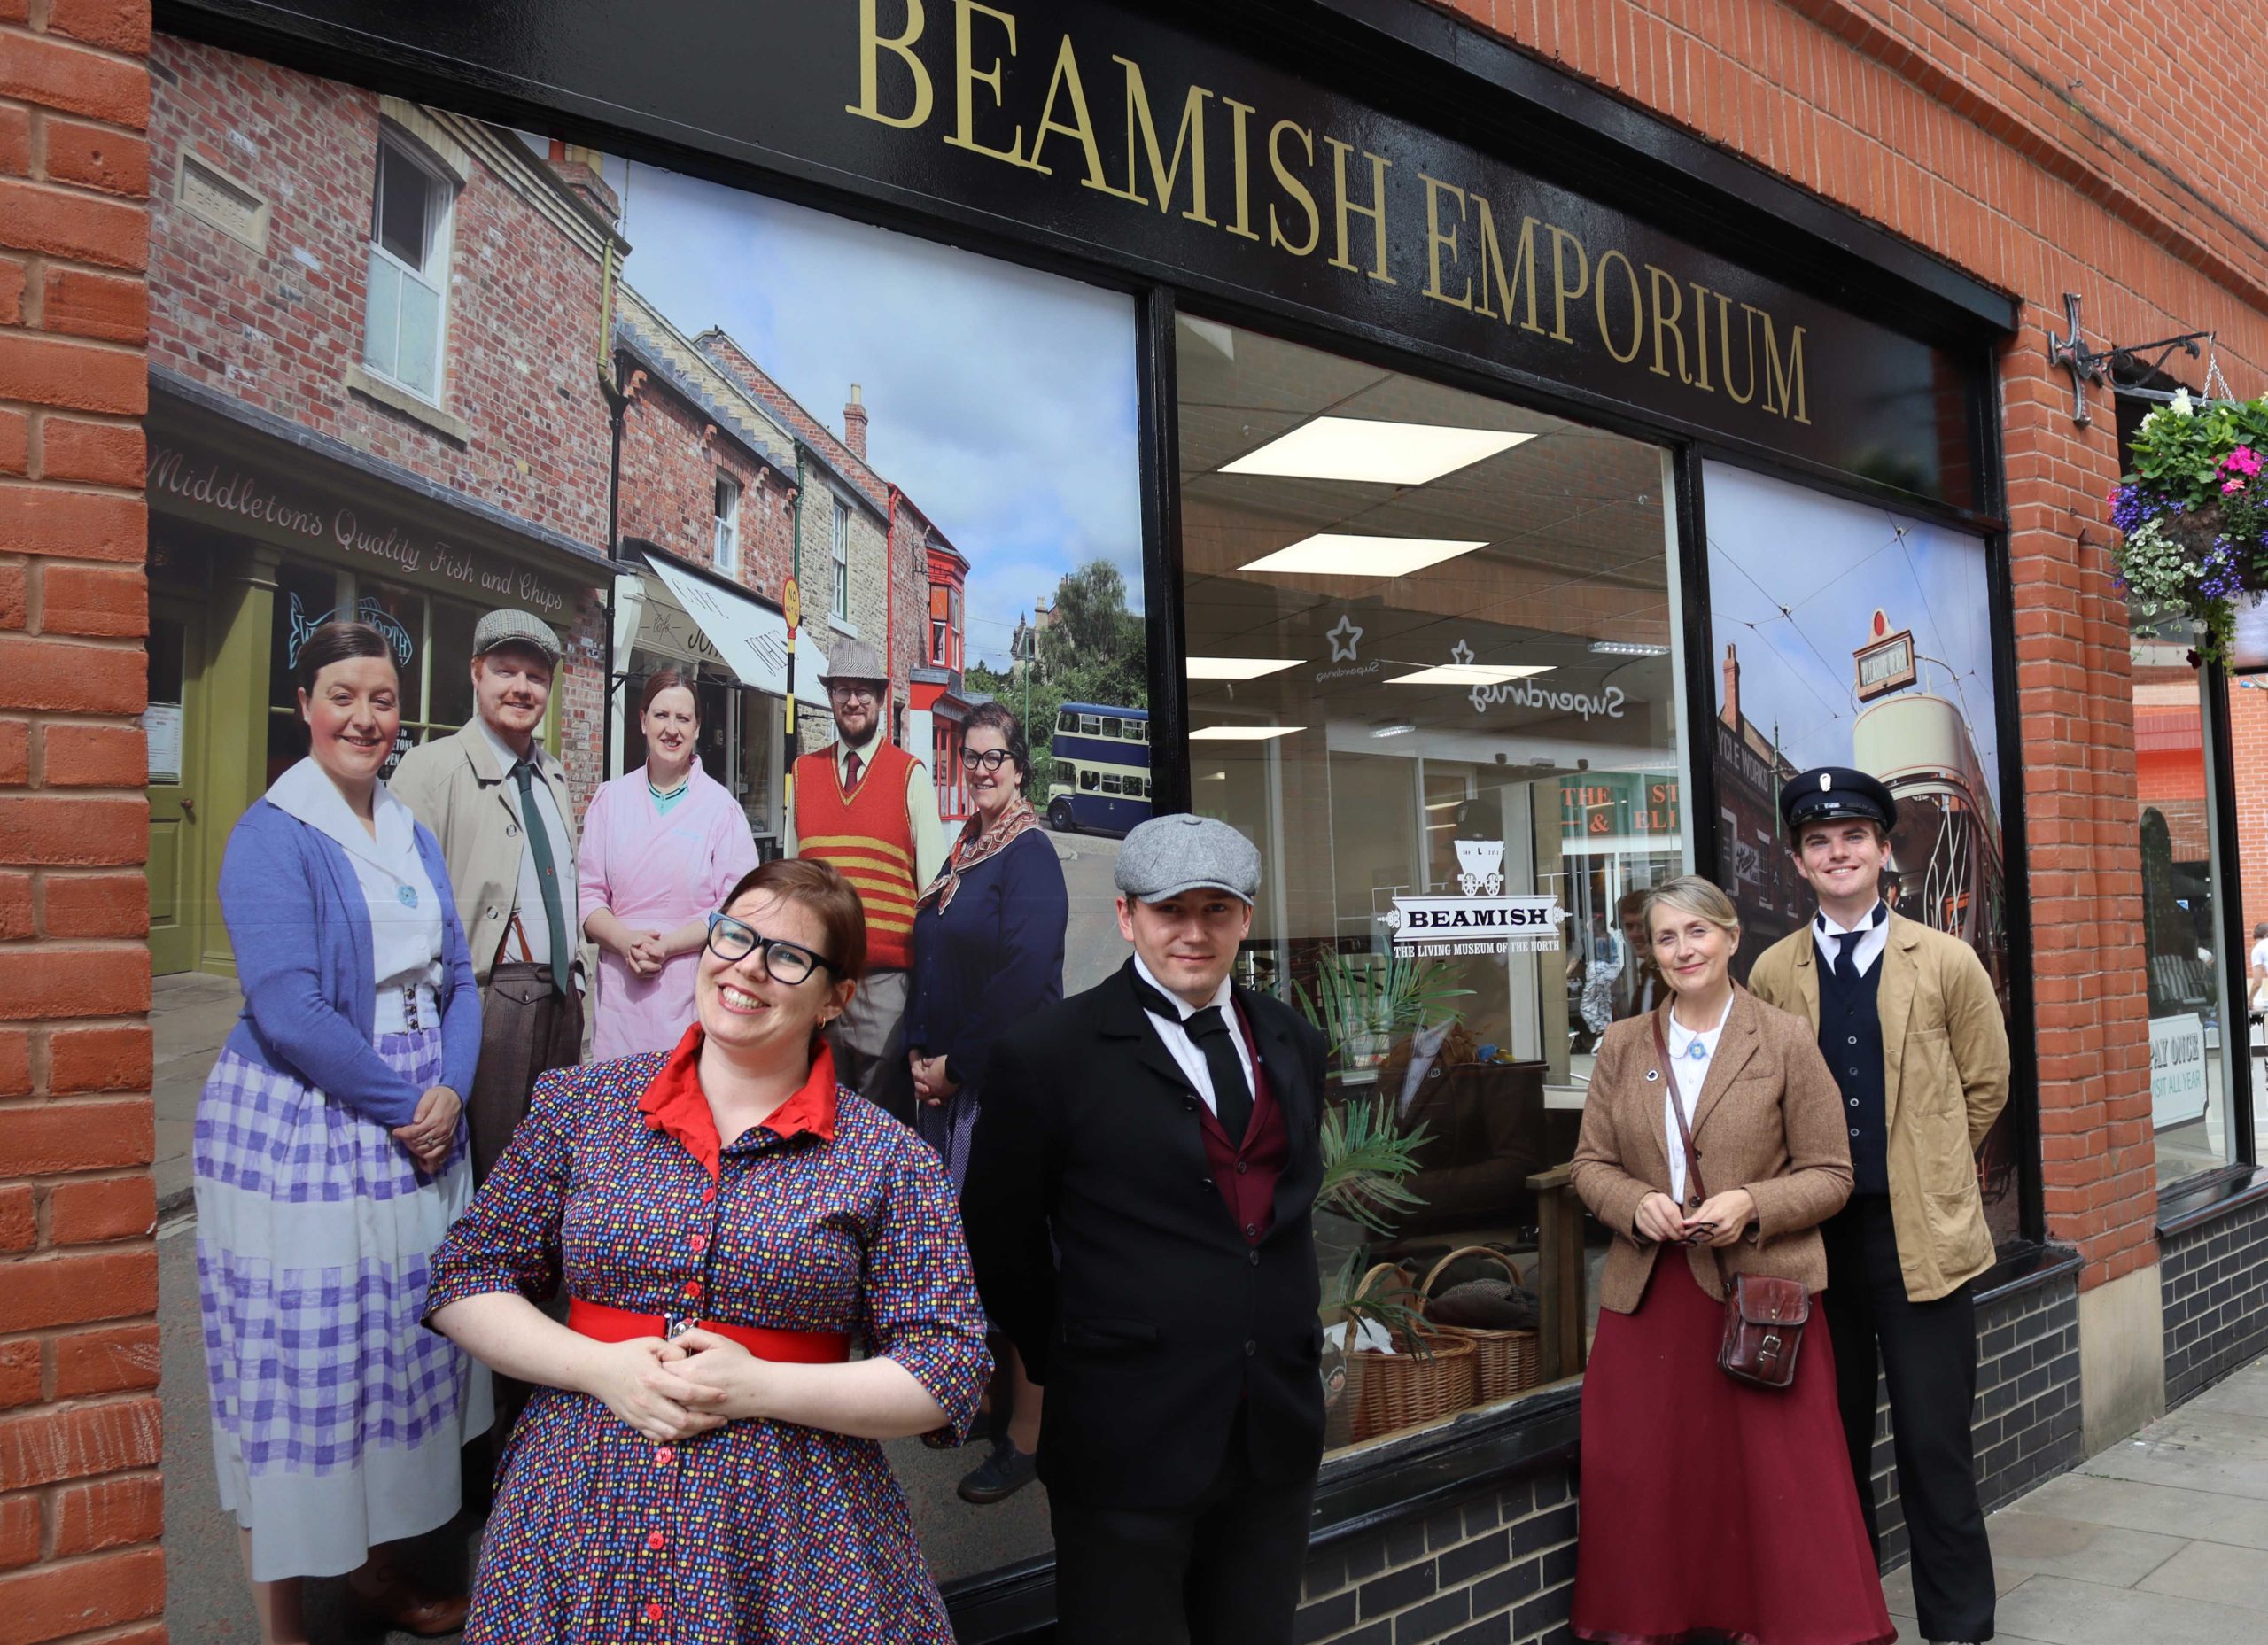 Beamish Museum staff in 1900s costume in front of 'Beamish Emporium' store front.